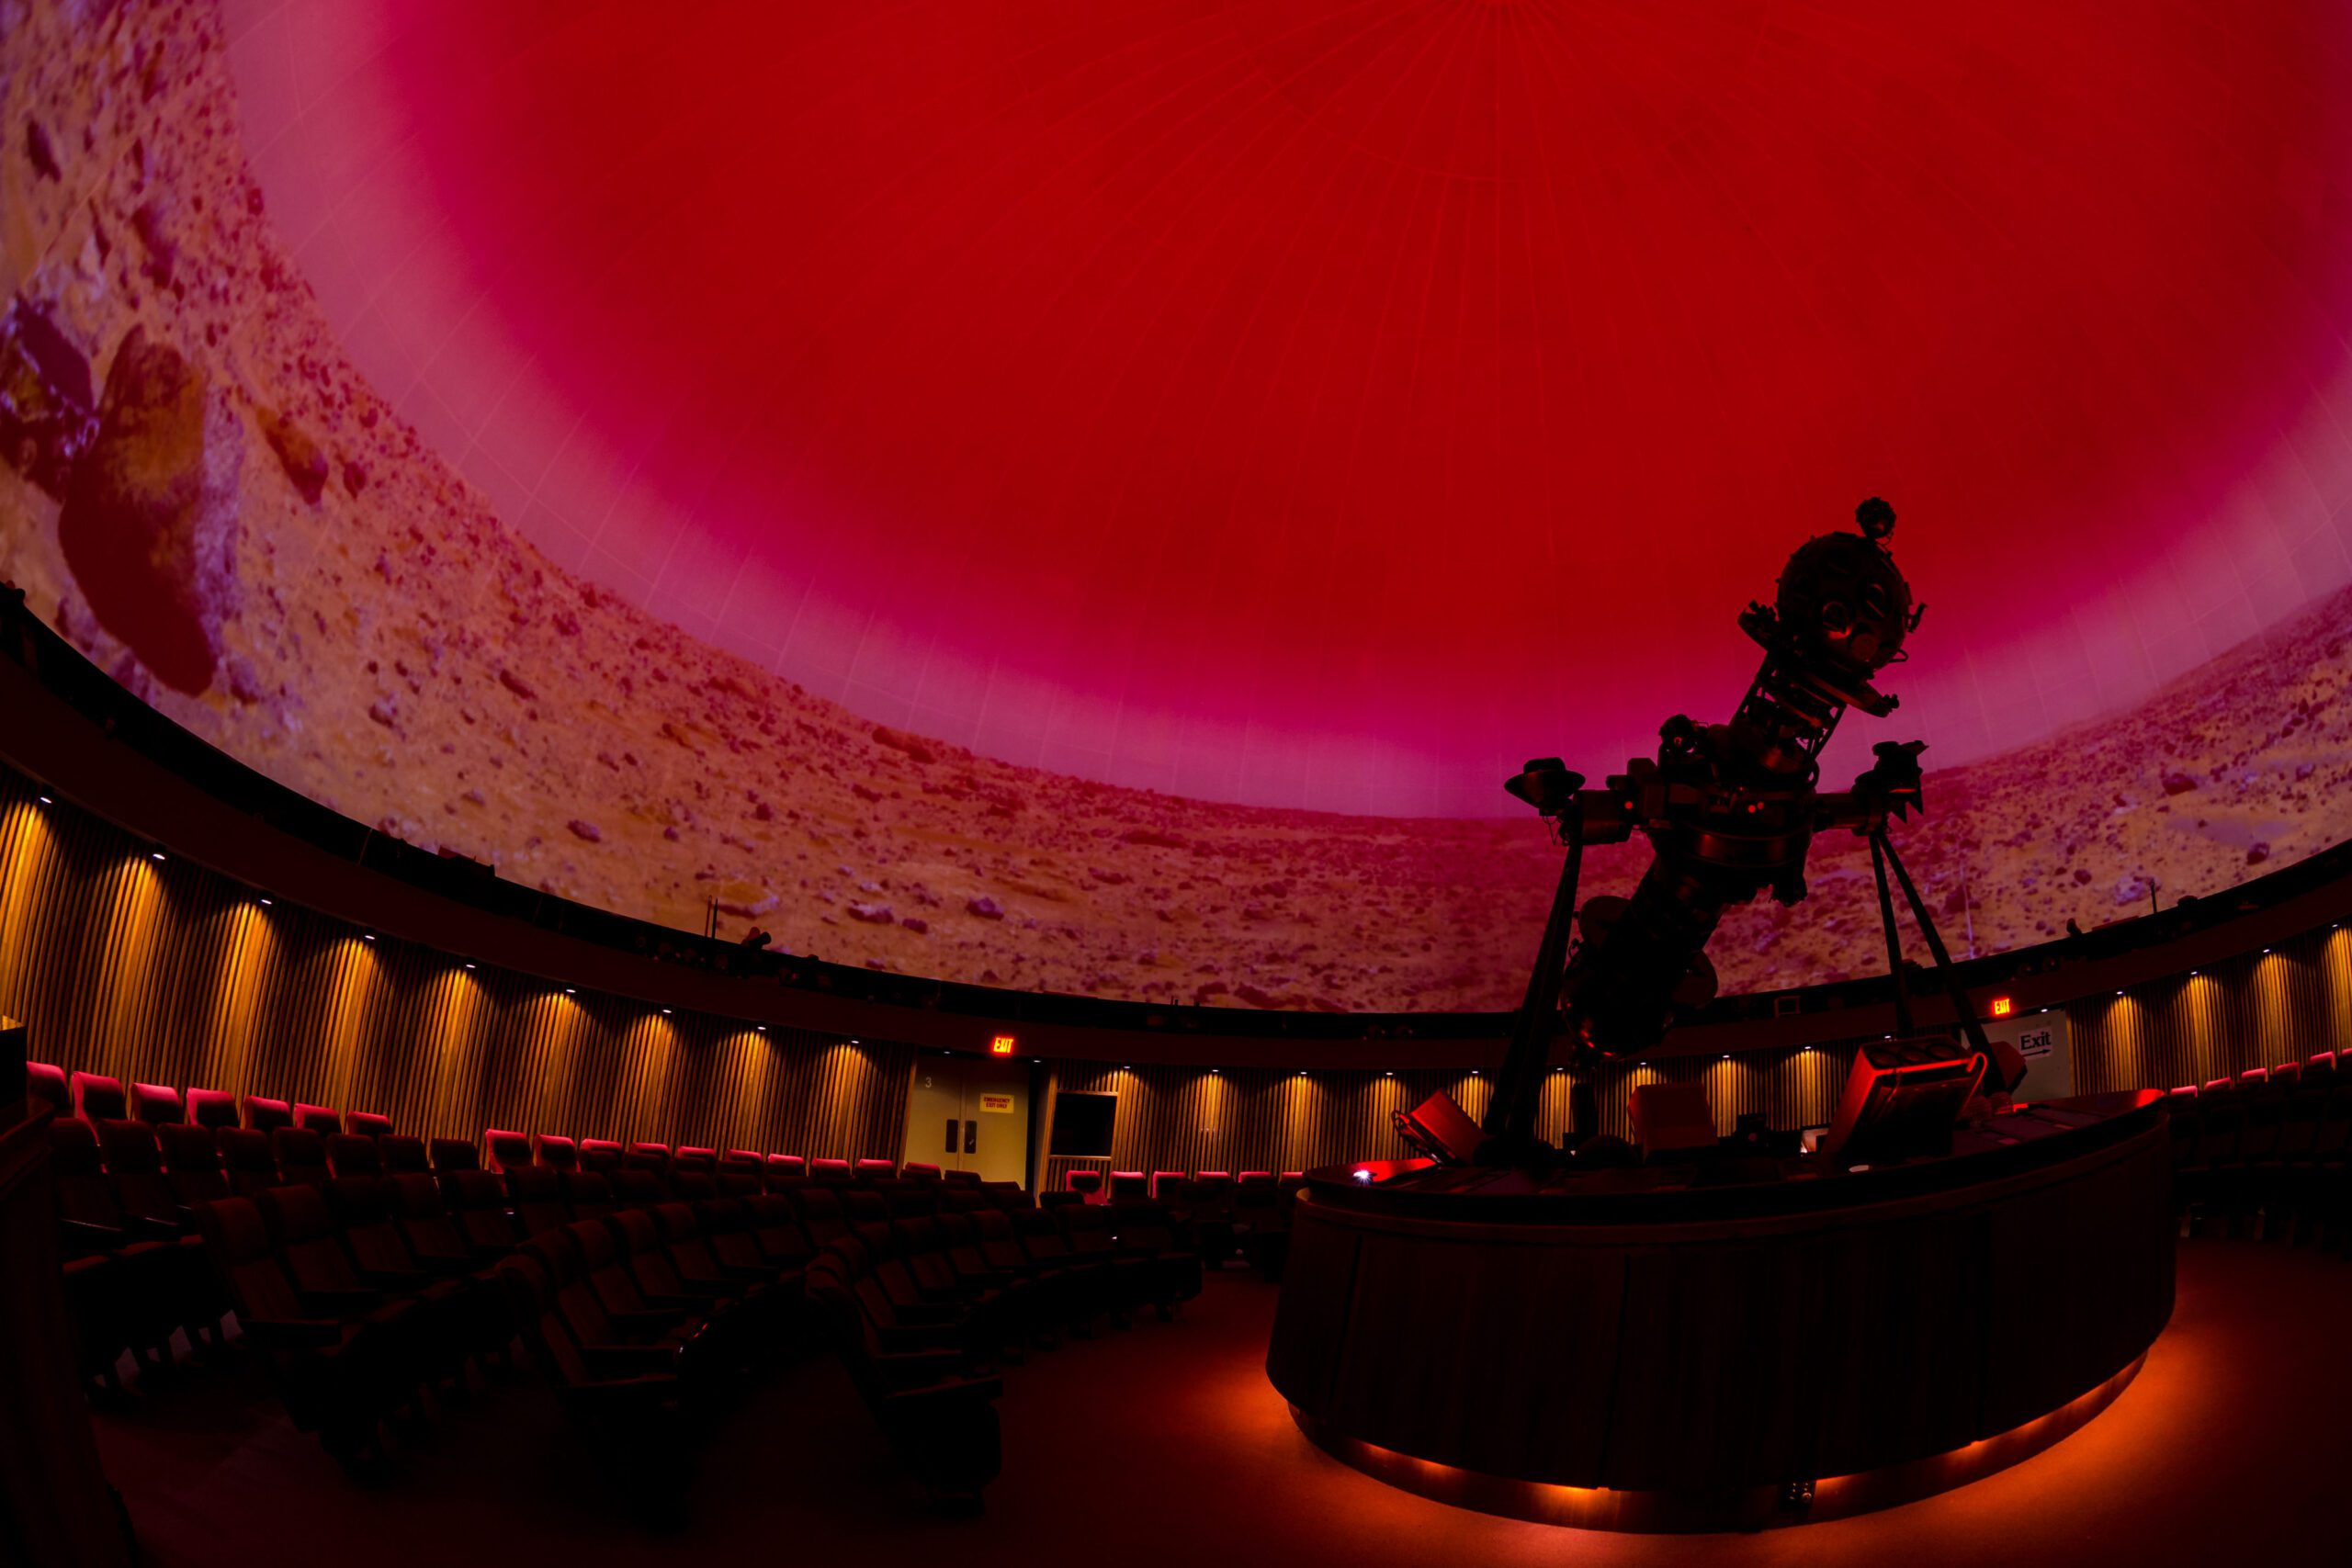 A wide-angle view of the inside of the Planetarium. On the right side is the Zeiss star projector on its platform, and displayed on the domed screen is a dry, rocky landscape and a red sky.